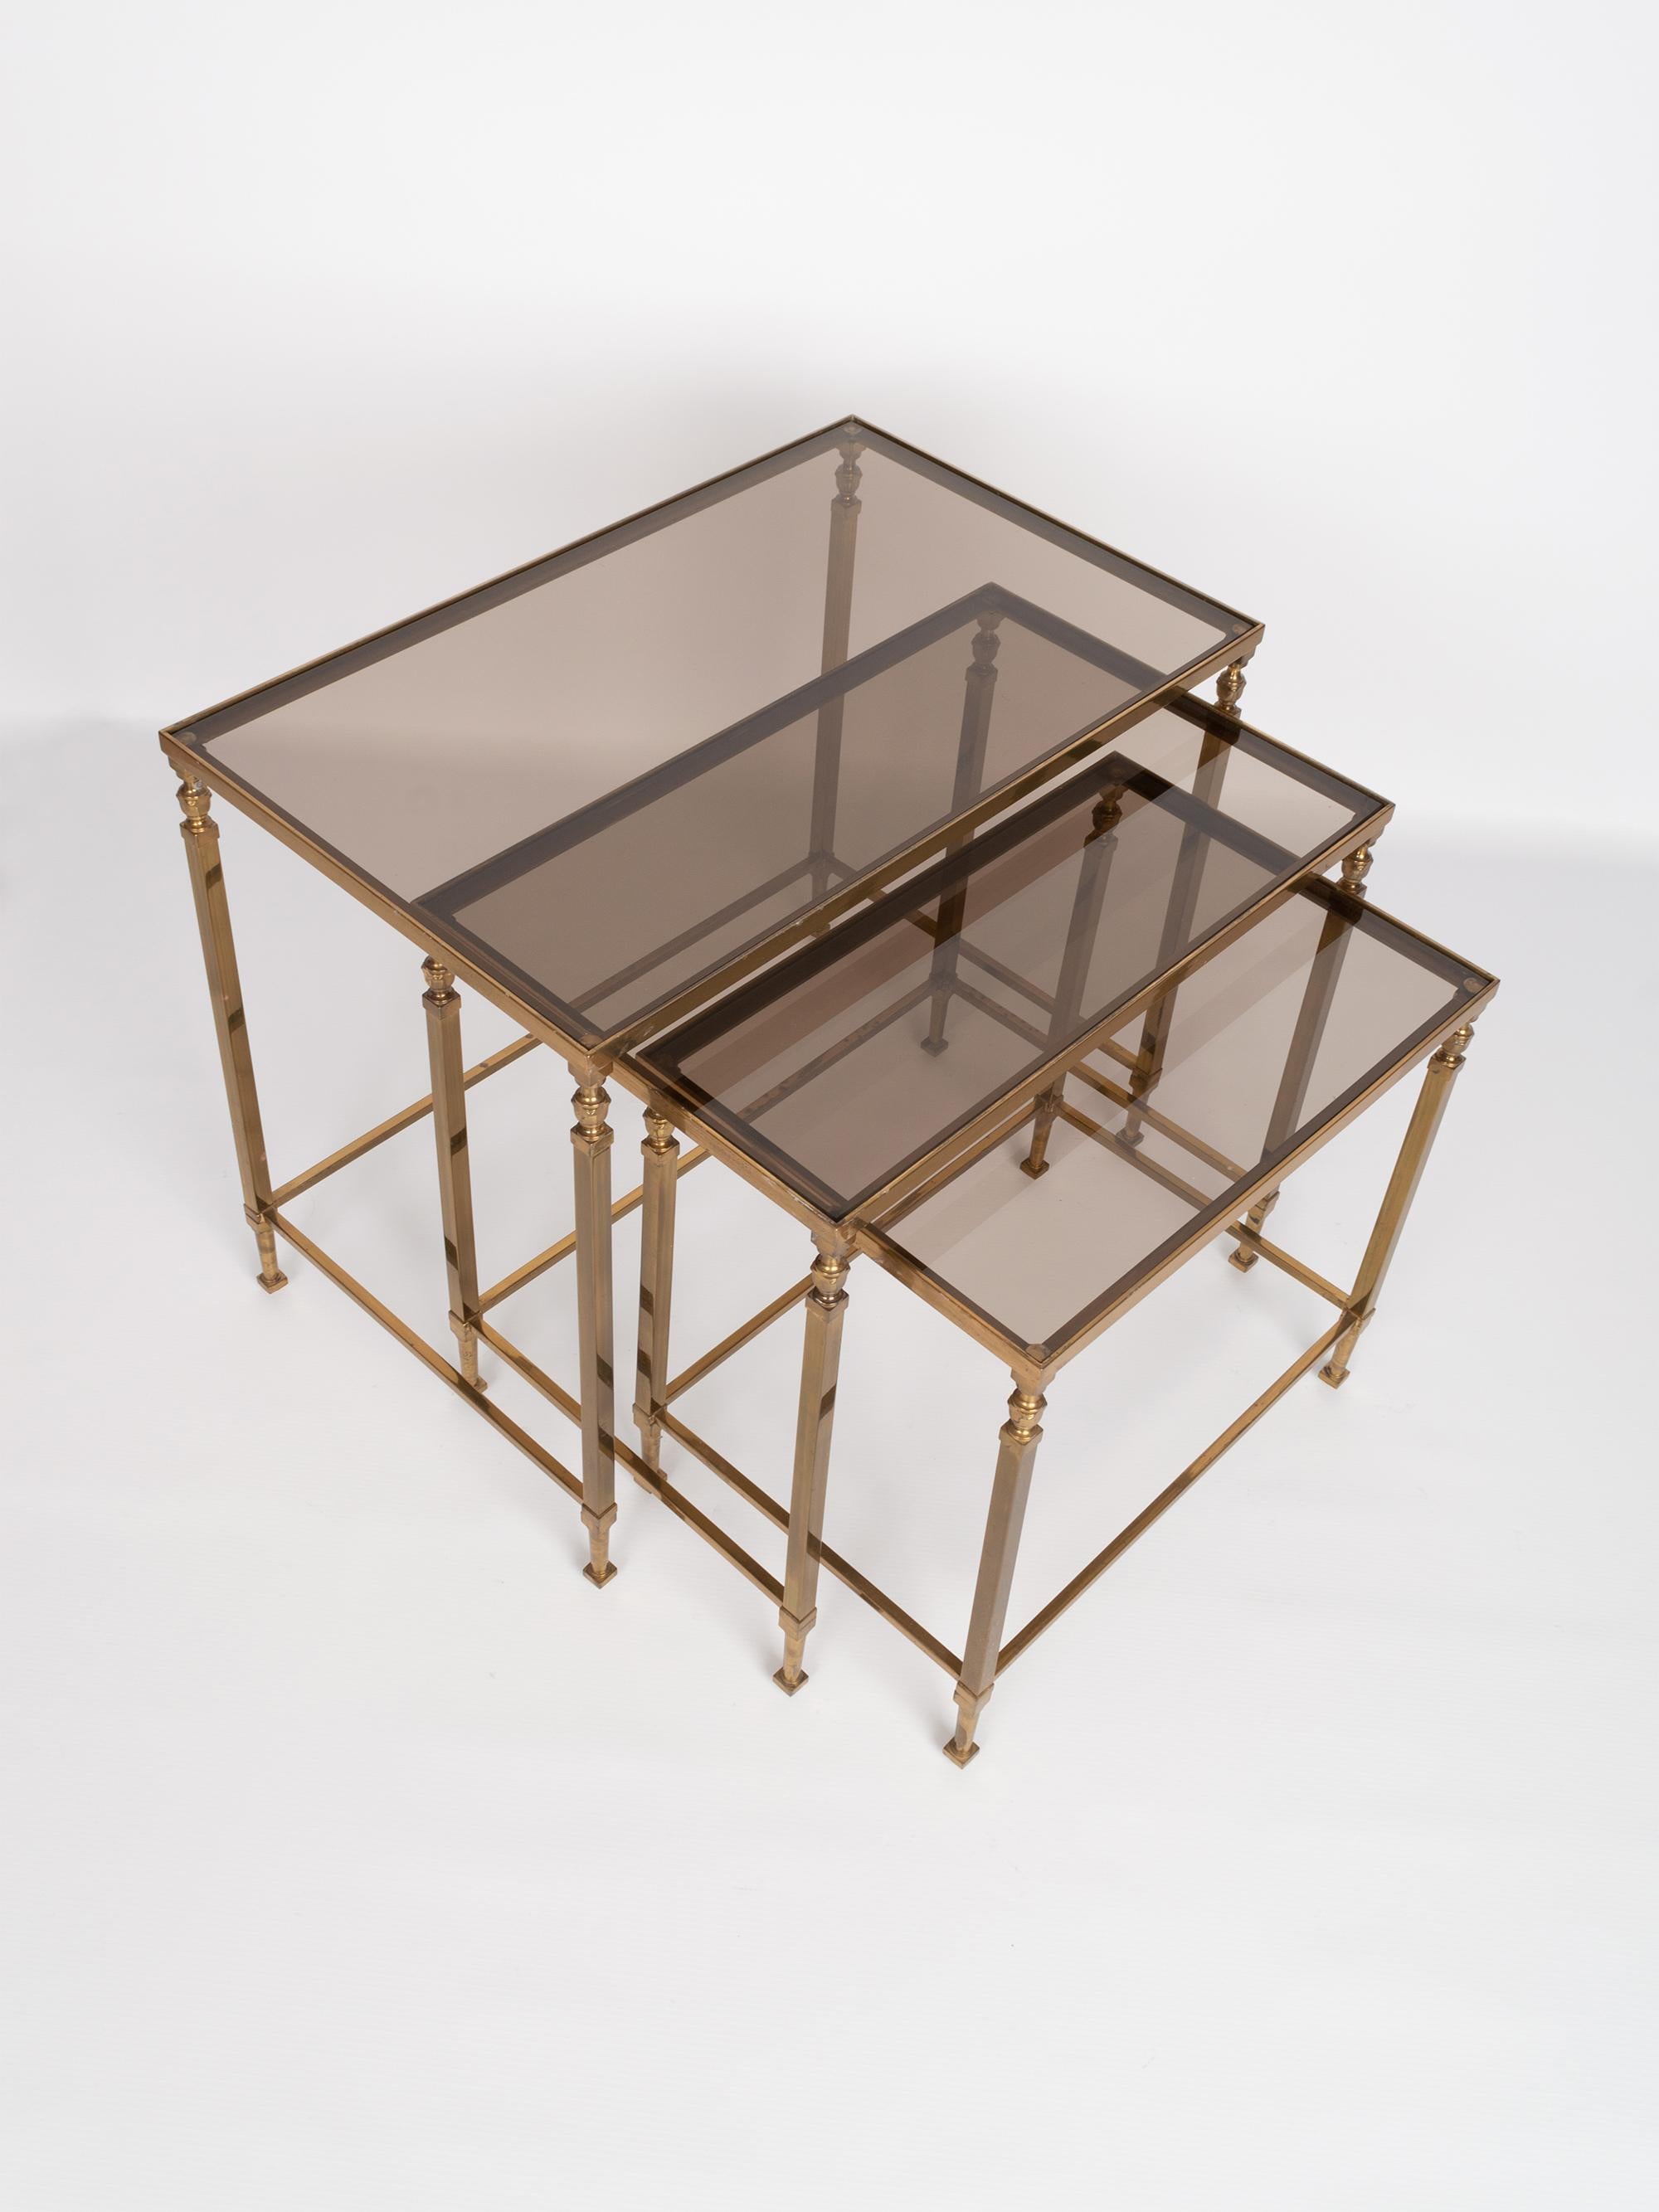 Midcentury brass and smoked glass nesting tables by Maison Baguès, France, circa 1960.
Presented in very good vintage condition commensurate of age.

Dimensions:
H 44 x W 52.5 x D 32.5 cm
H 40 x W 45.5 x D 29.5 cm
H 36 x W 38.5 x D 26.5 cm
   